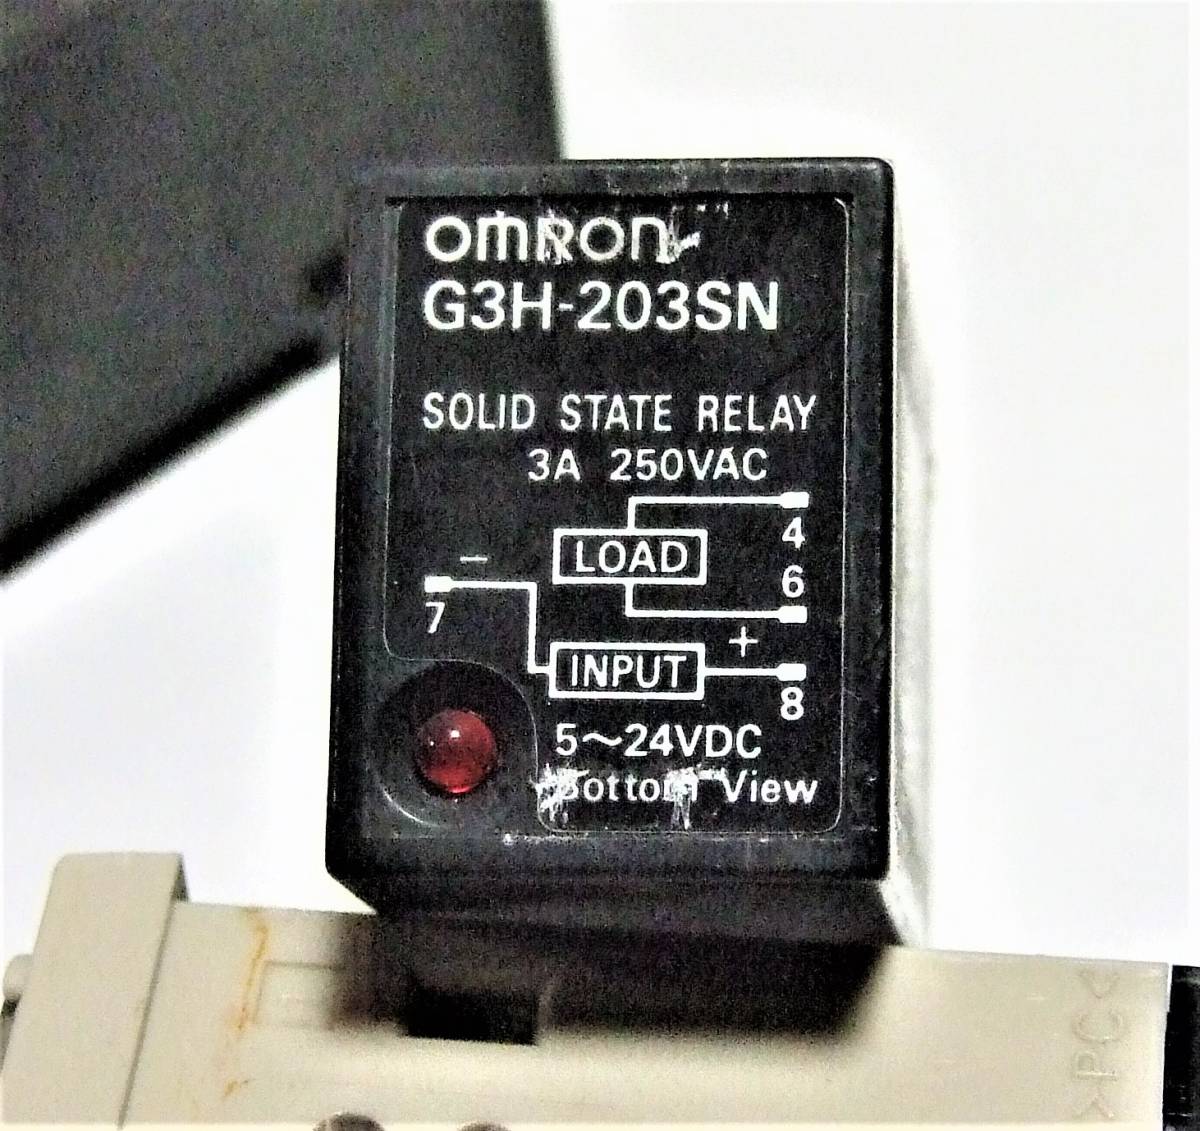 20-10/9 solid state * relay OMRON G3H-203SN socket 